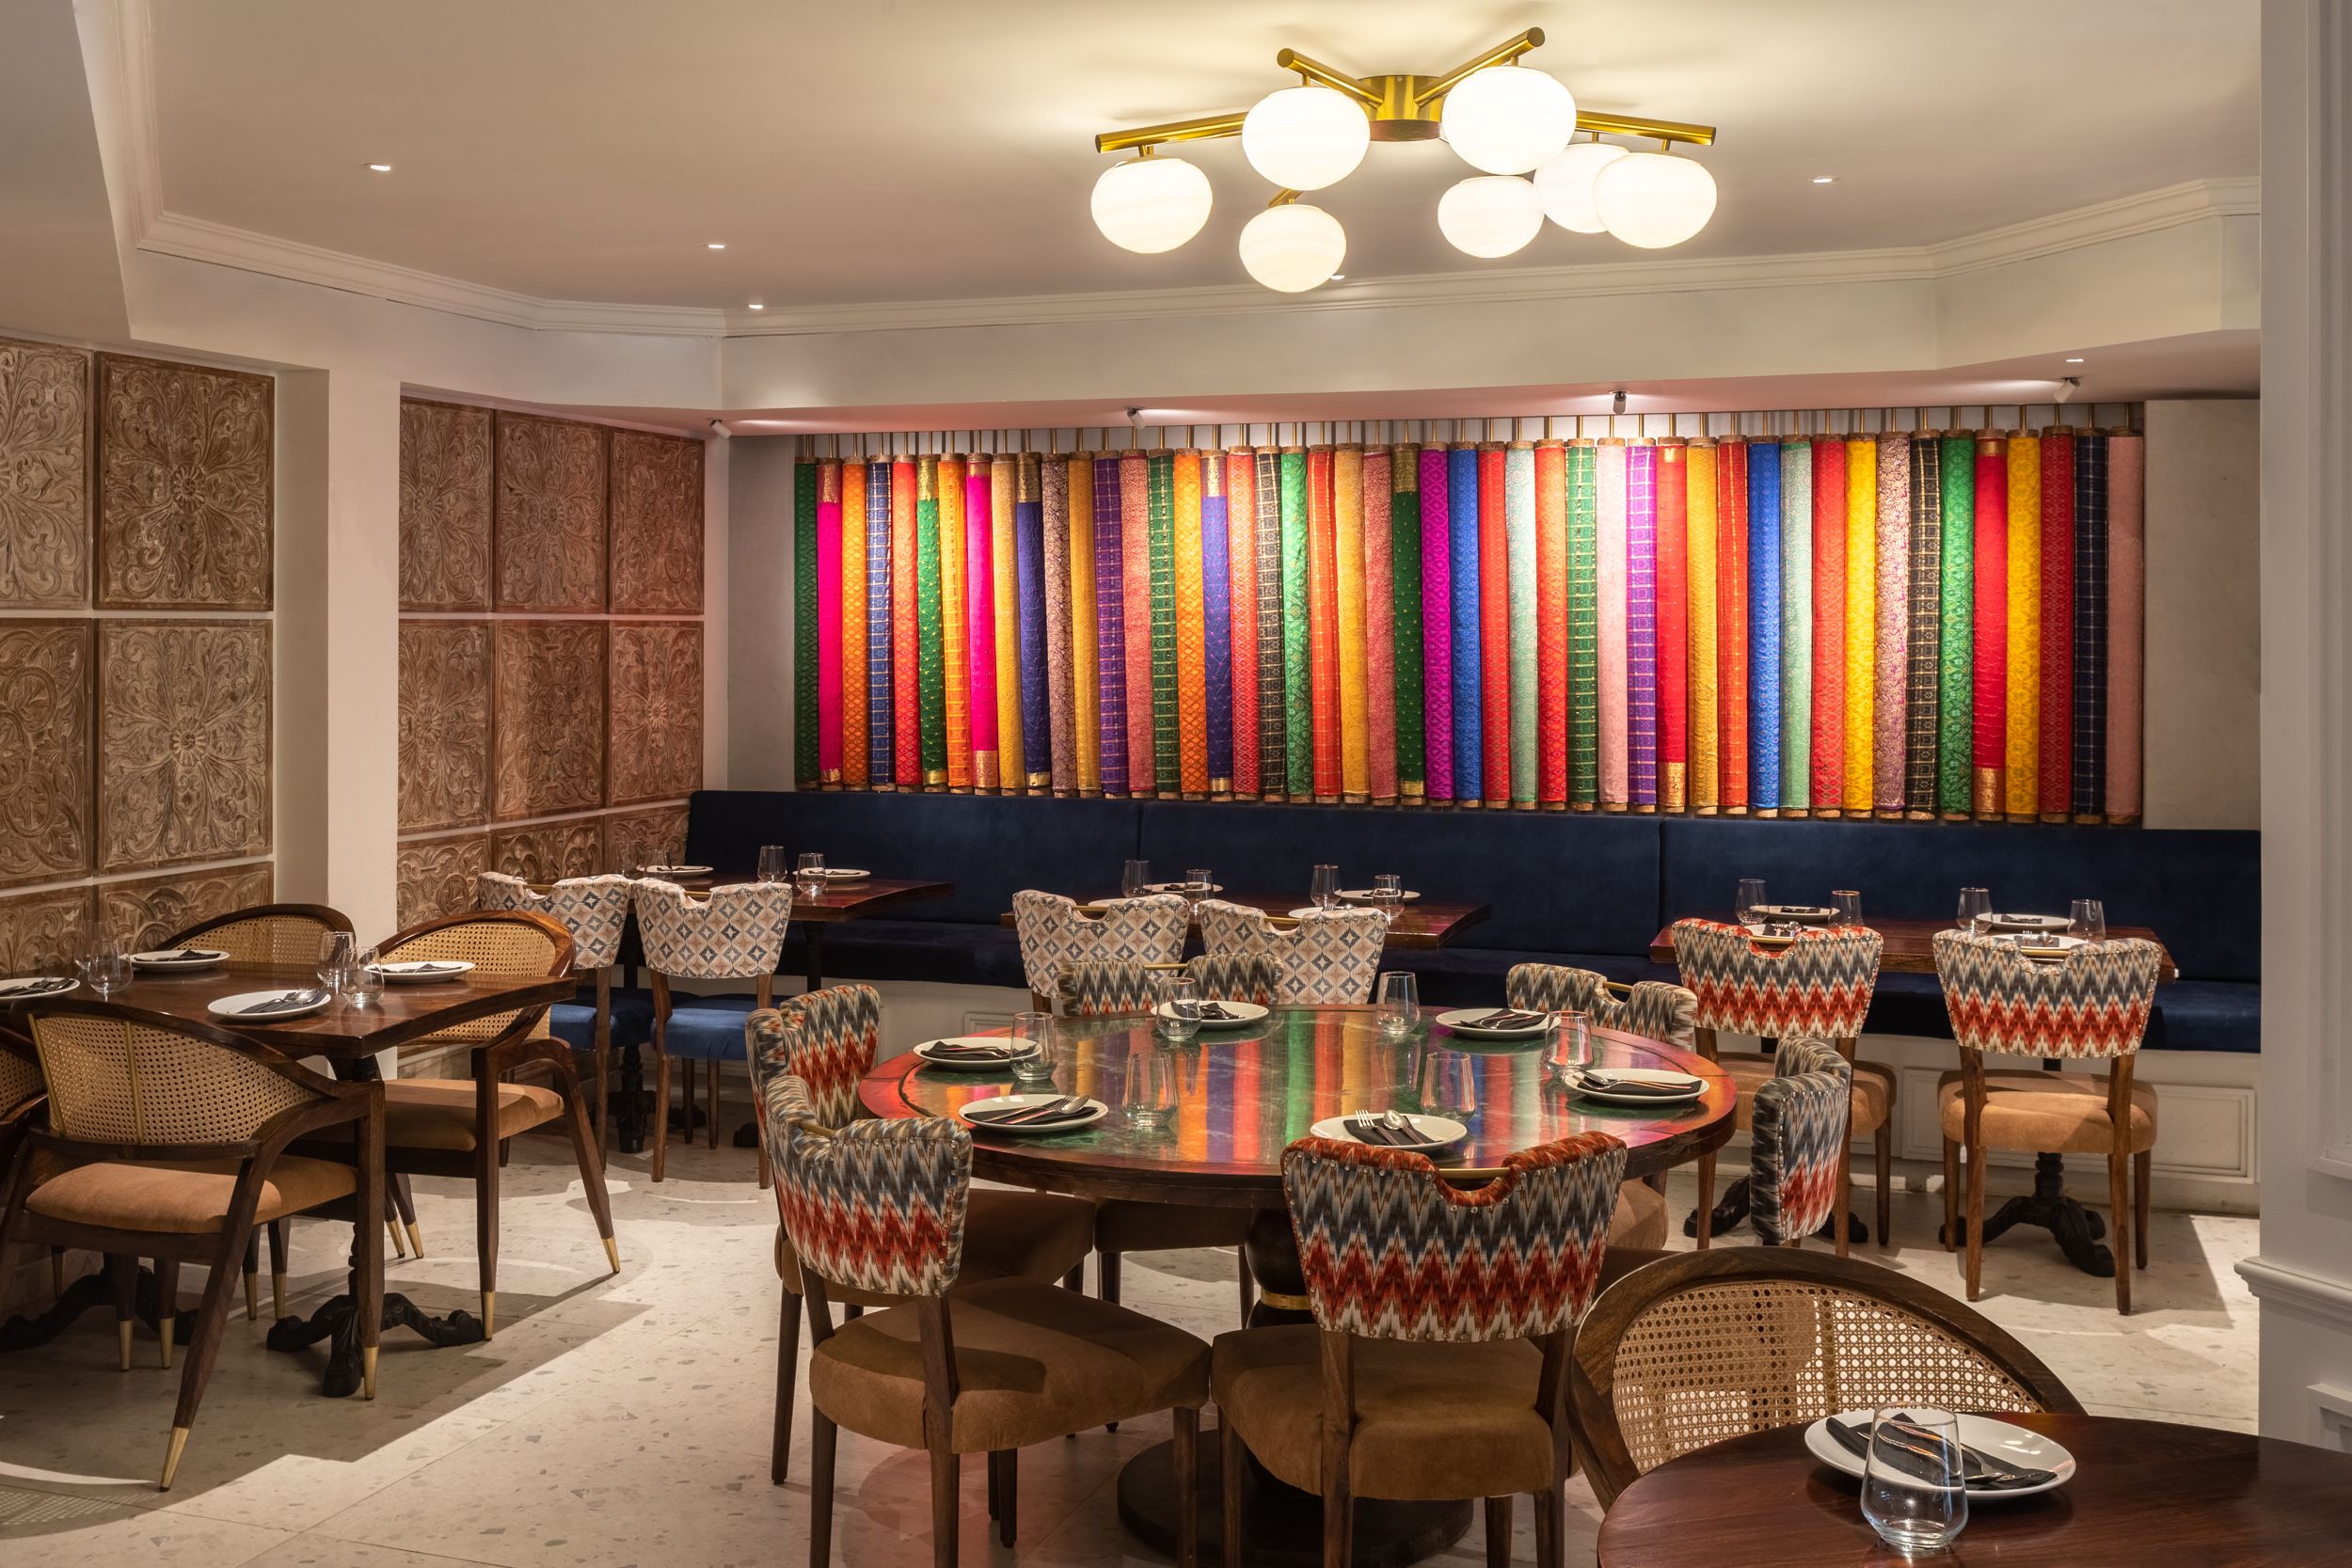 Colaba Restaurant Unveils Stunning Blend of India’s Heritage and Modern Design for Culinary Adventure